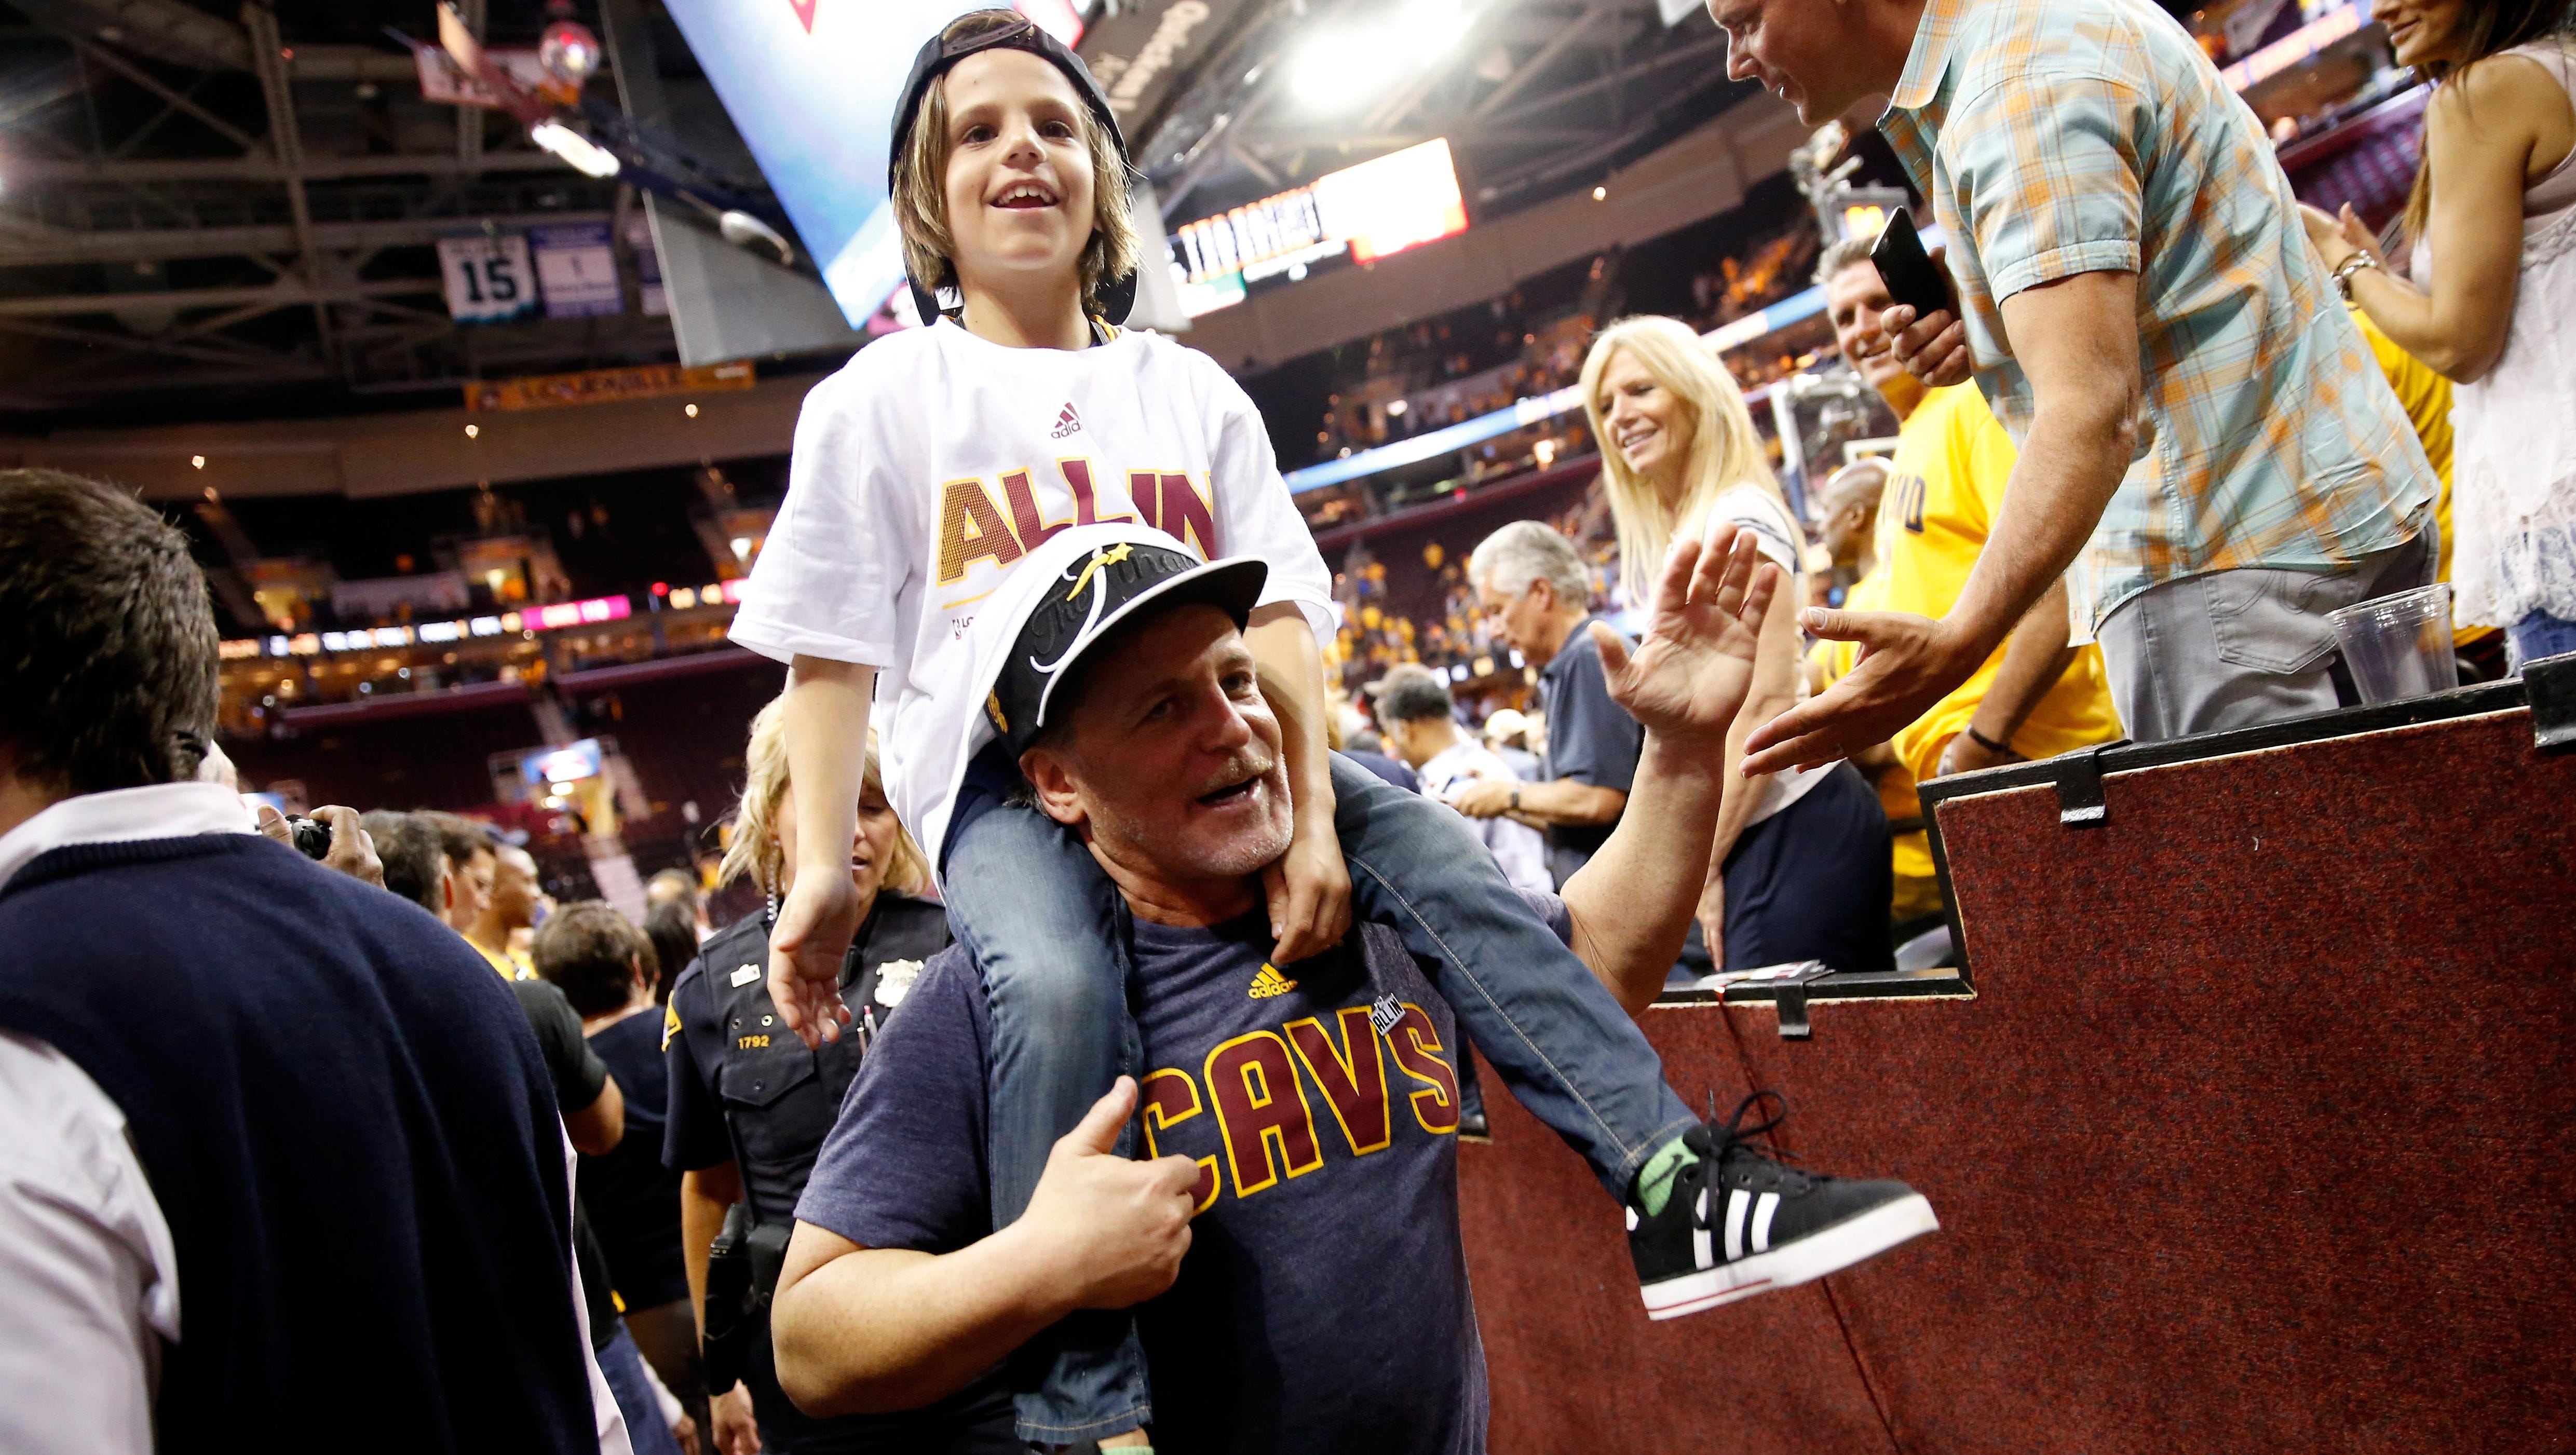 Cavaliers owner Dan Gilbert takes a youngster for a ride after winning the Eastern Conference.